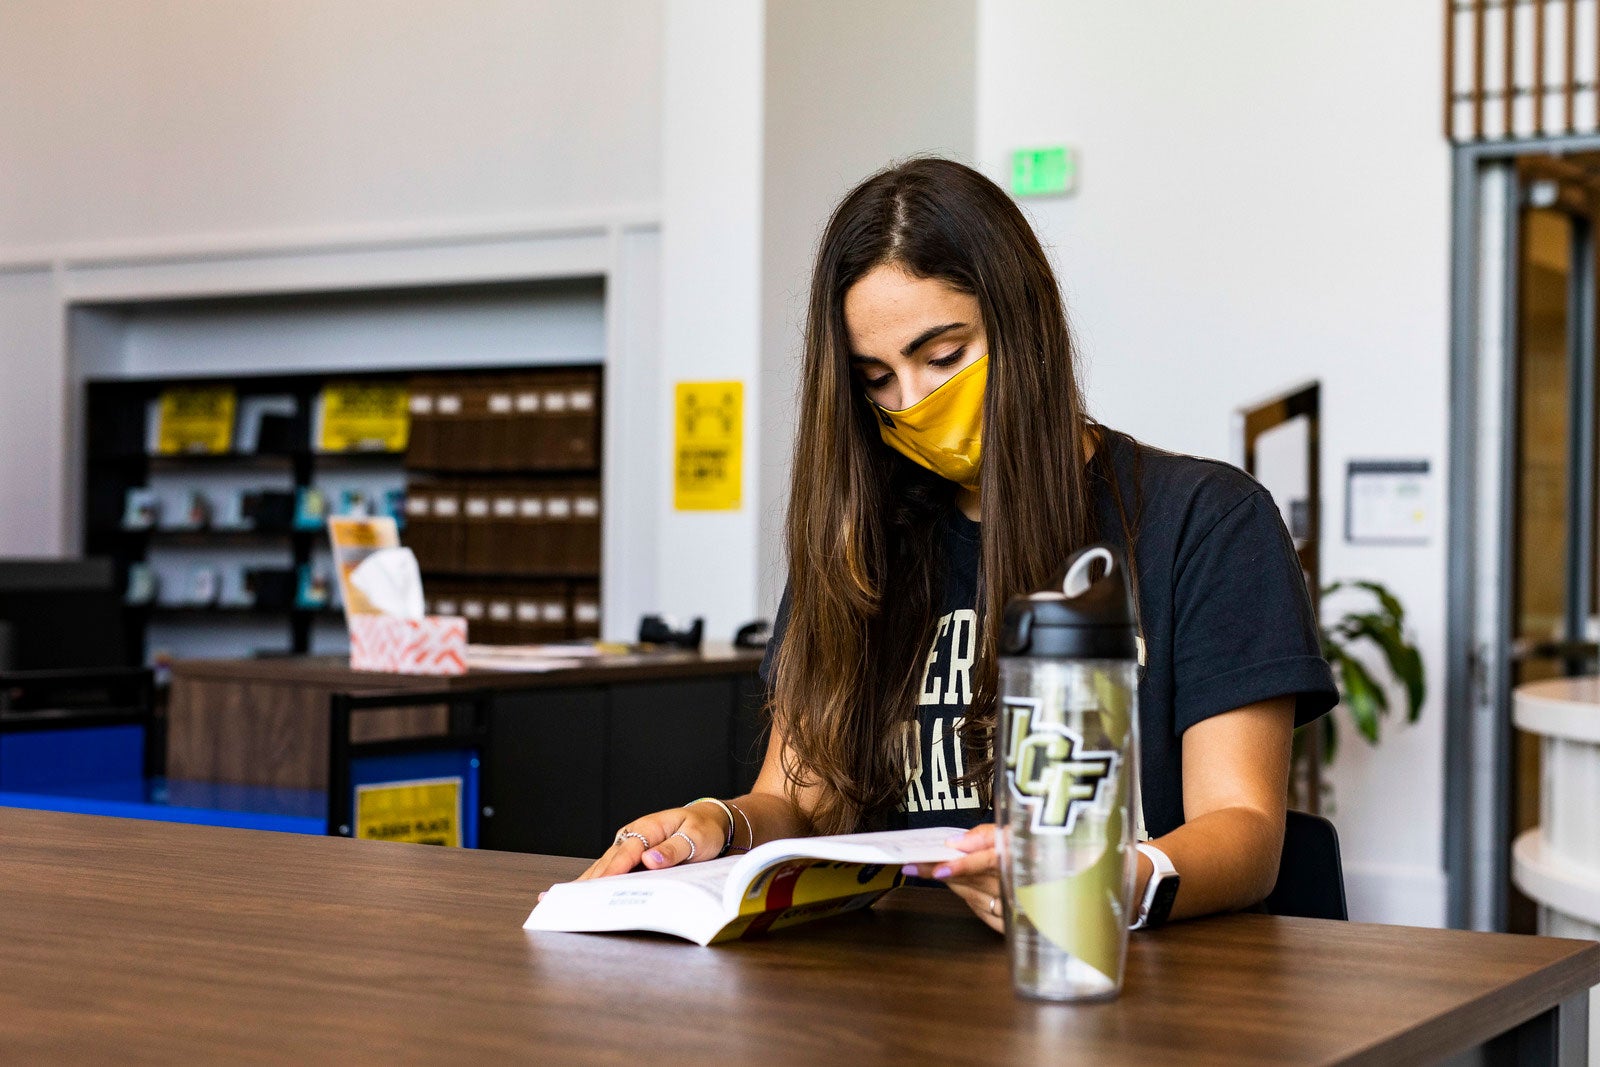 ucf downtown girl in library